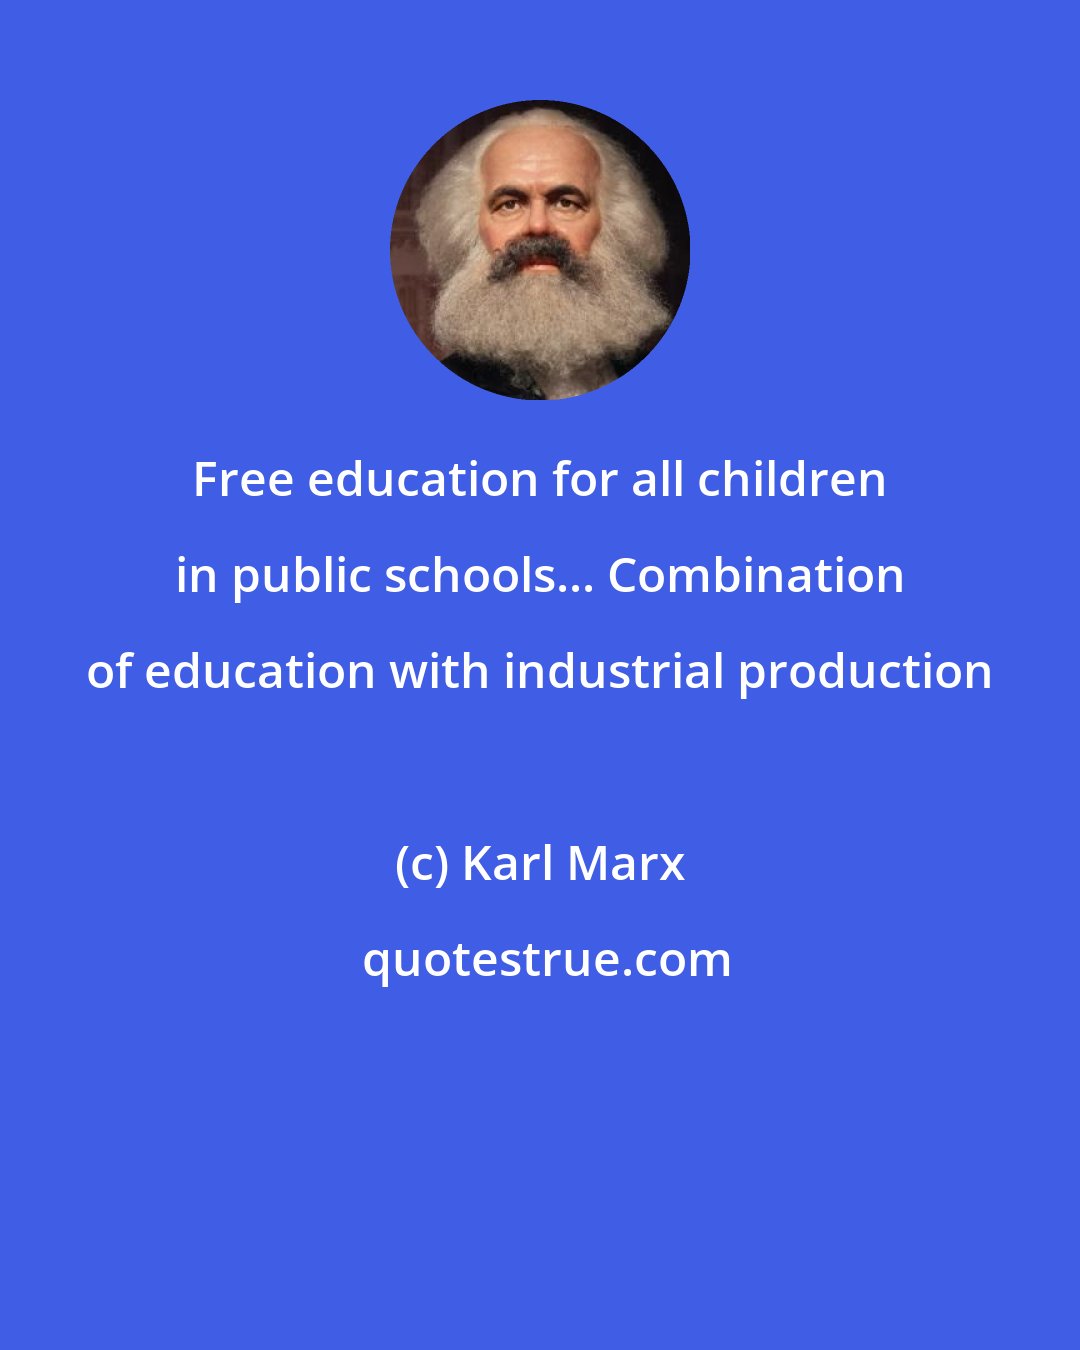 Karl Marx: Free education for all children in public schools... Combination of education with industrial production